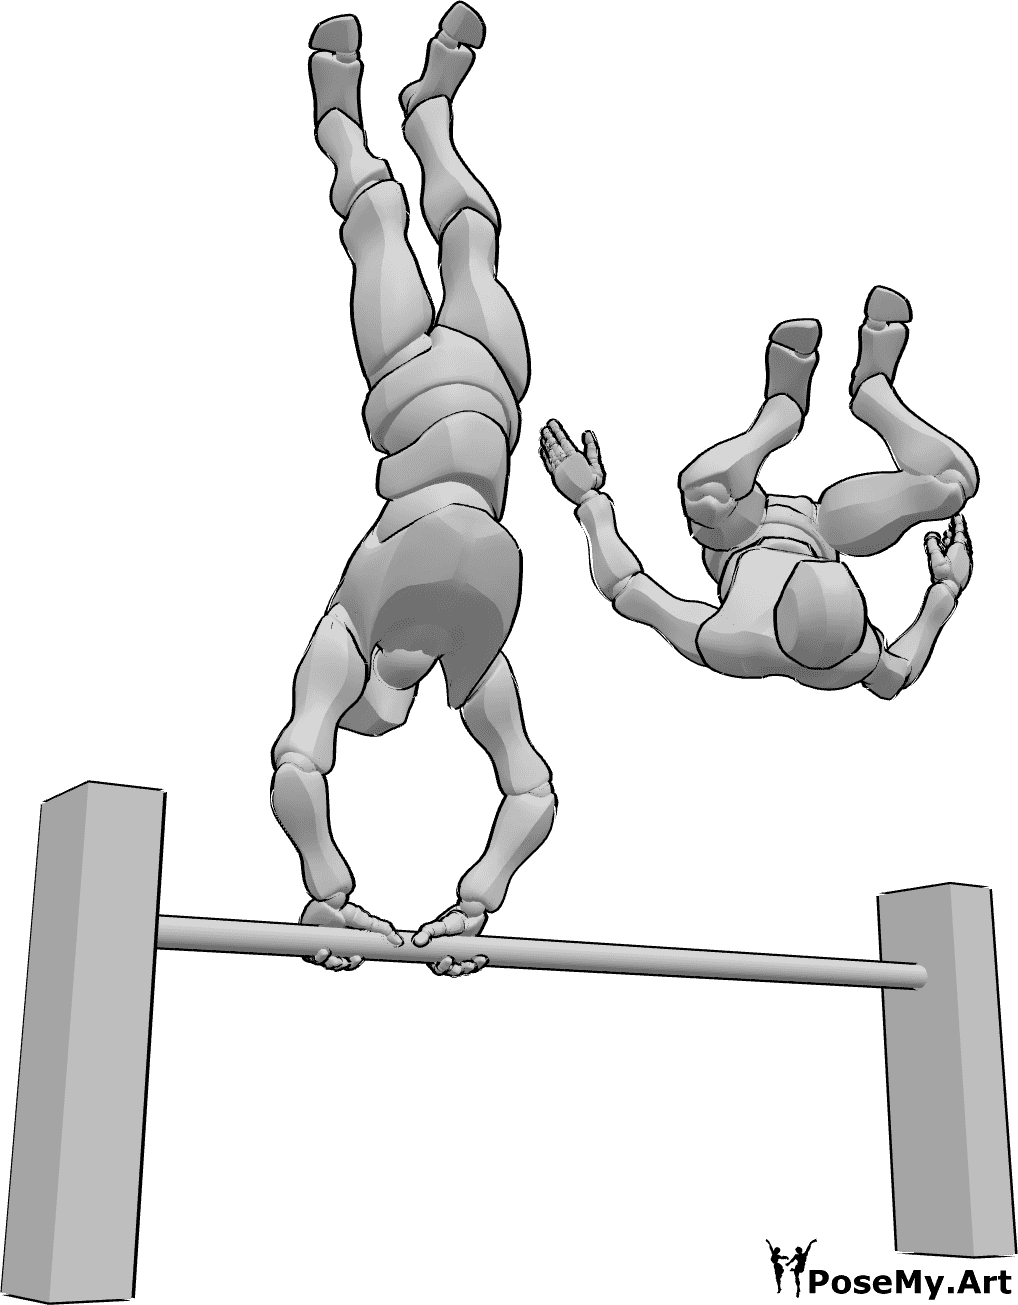 Pose Reference- Parkour exercising pose - Two males are exercising, one of them is handstanding on a barrier, the other one is doing a front flip